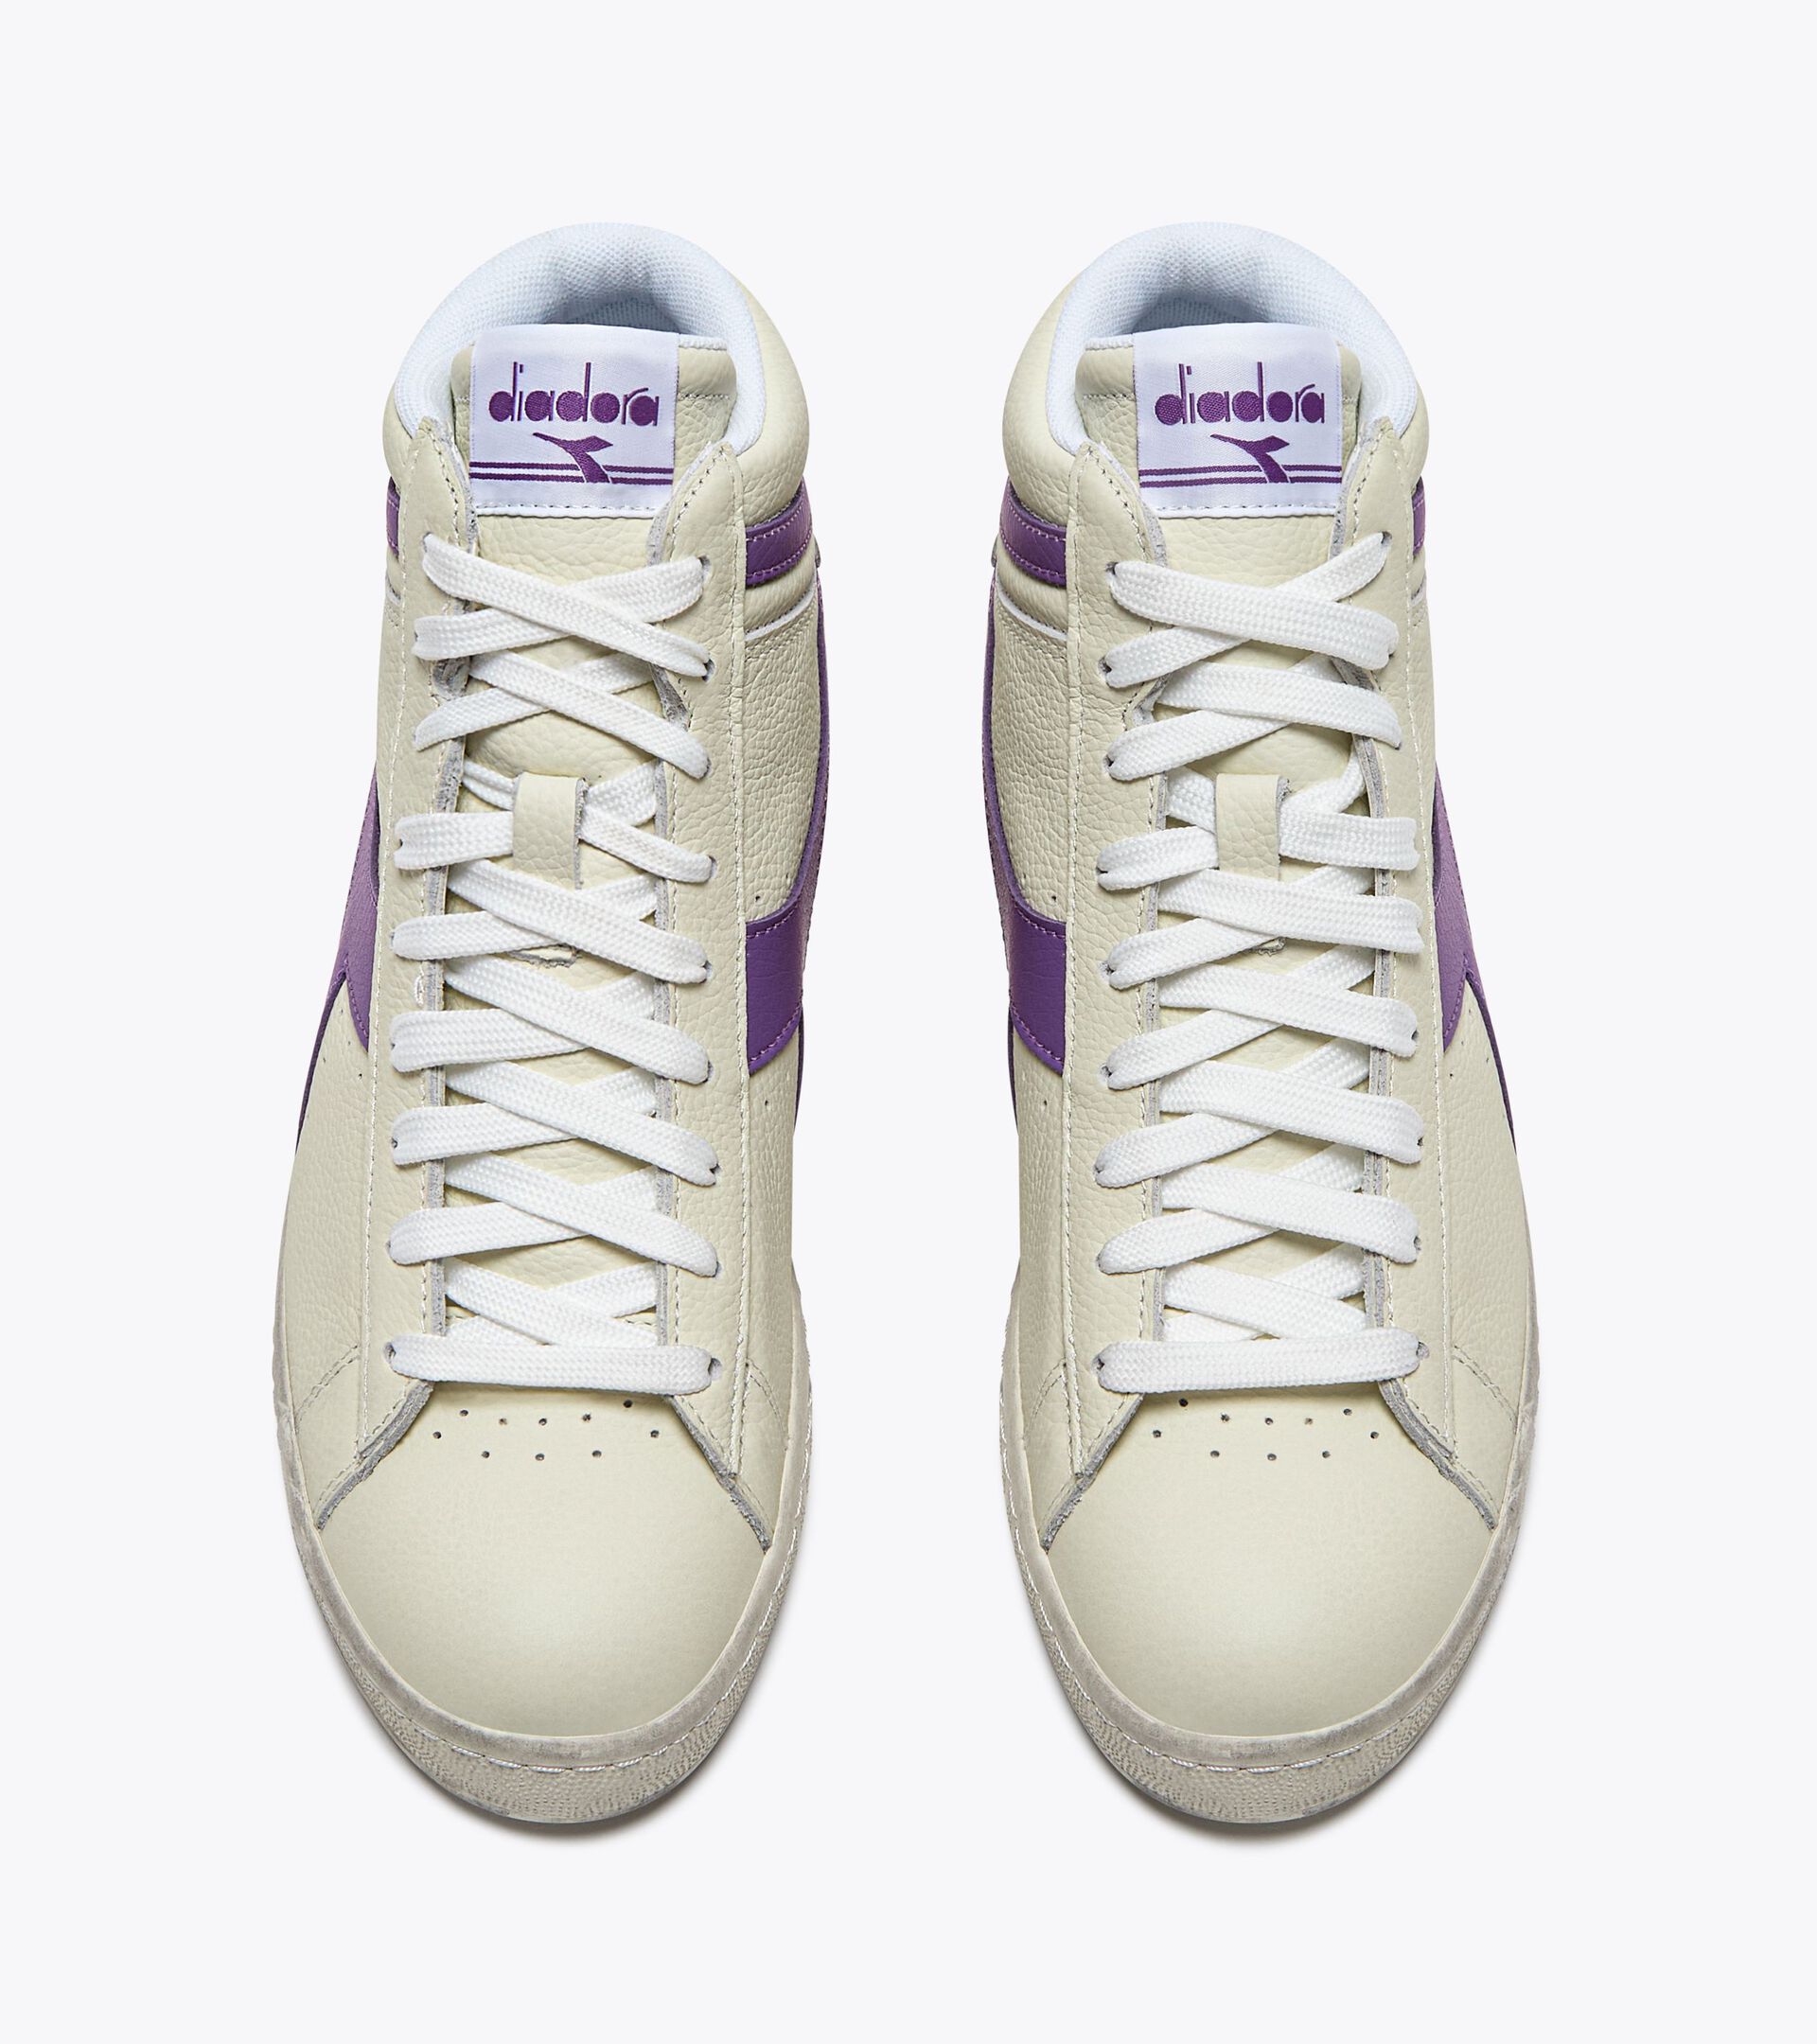 Sporty sneakers - Gender neutral GAME L HIGH WAXED WHITE/VIOLET BERRY  (C6210) - Diadora